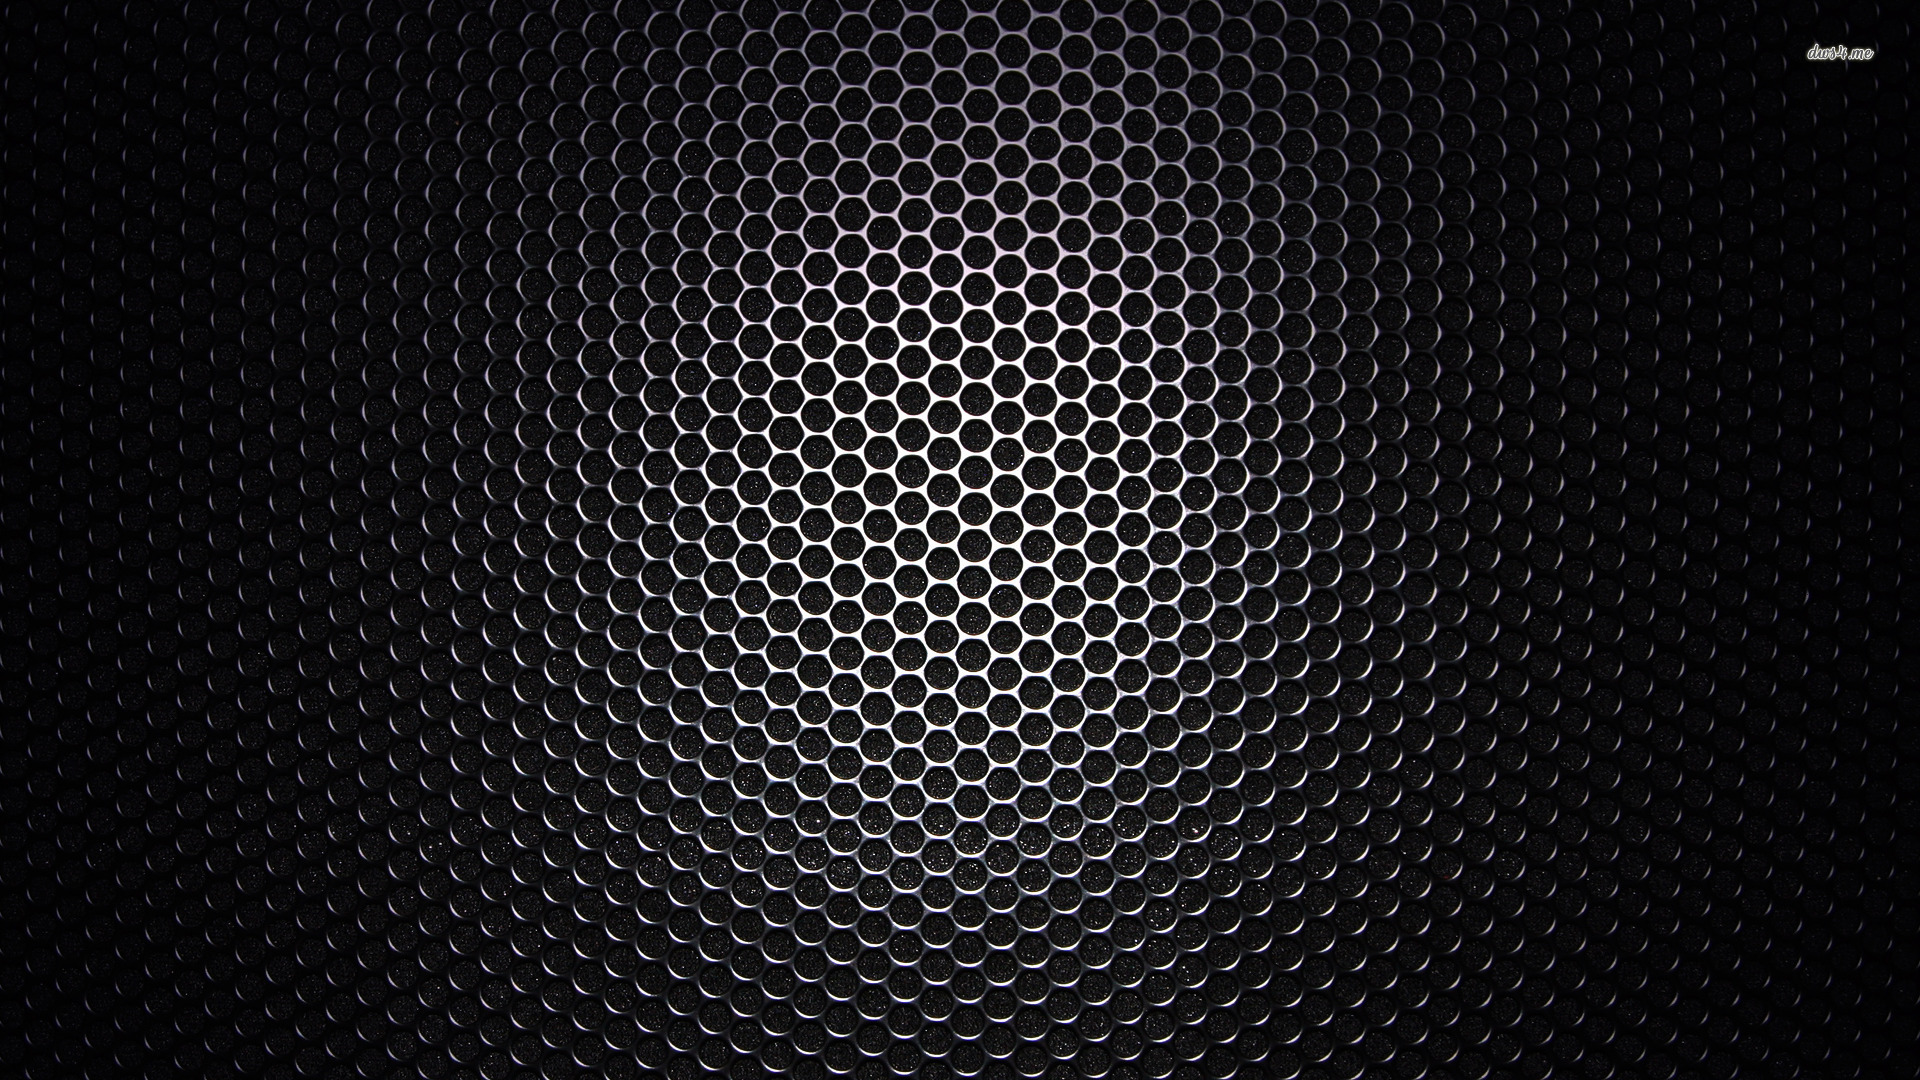  Grill Texture Abstract Jpg Wallpaper 1920x1080 Full HD Wallpapers